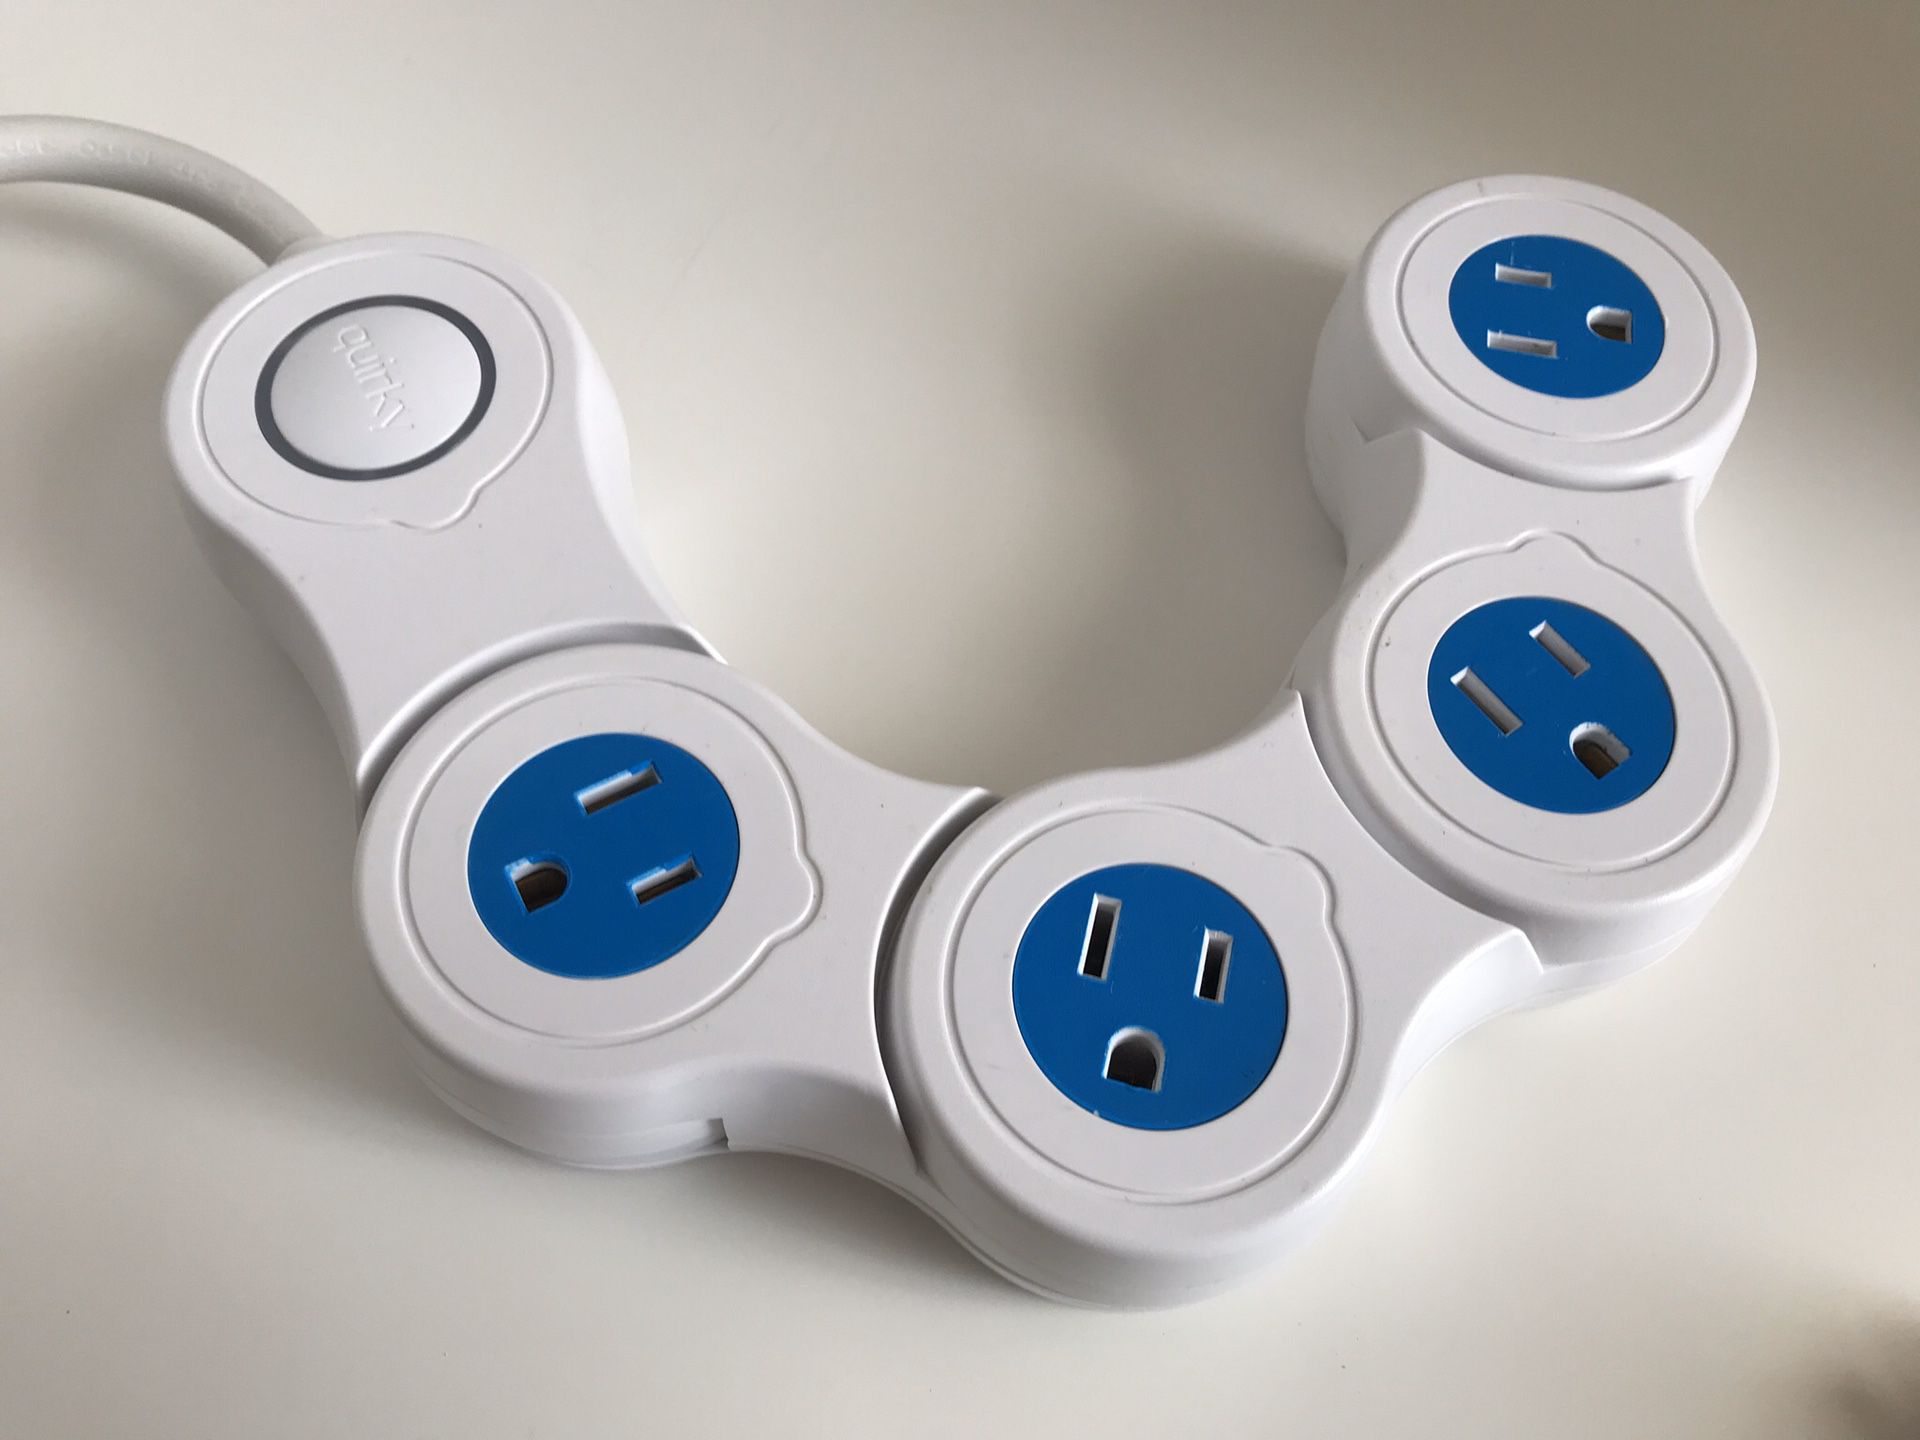 Quirky 4 outlet surger protector